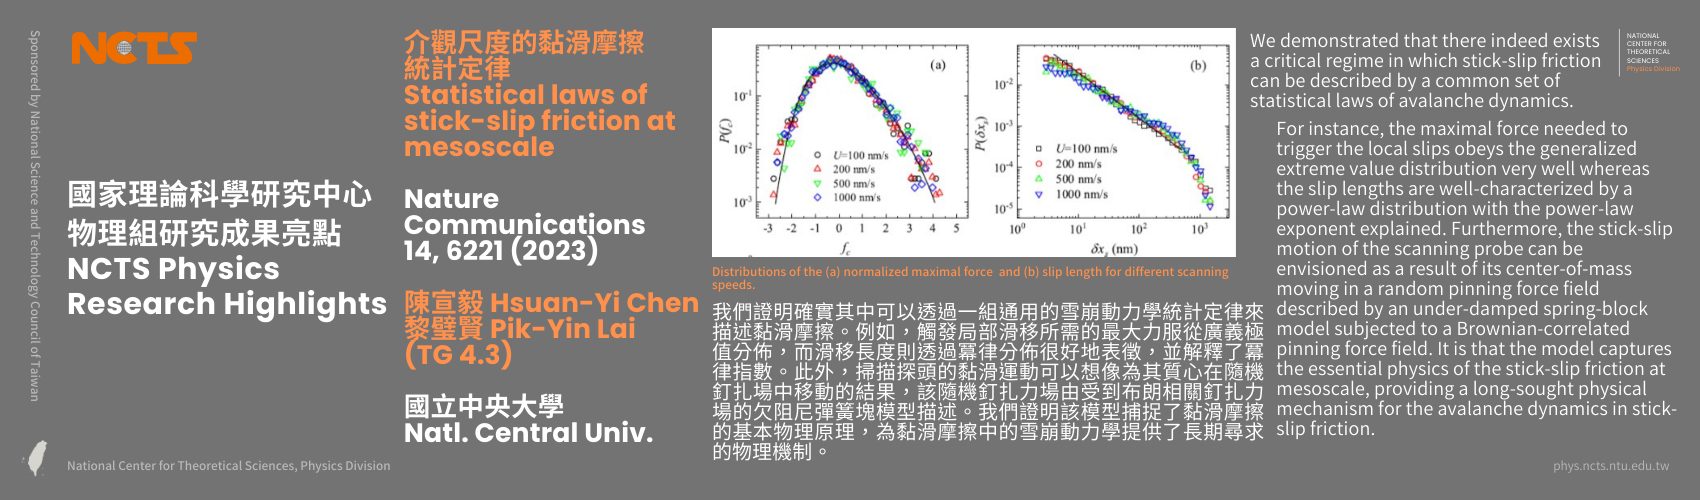 [NCTS Physics Research Highlights] Hsuan-Yi Chen & Pik-Yin Lai 'Statistical laws of stick-slip friction at mesoscale', Nature Communications 14, 6221 (2023)